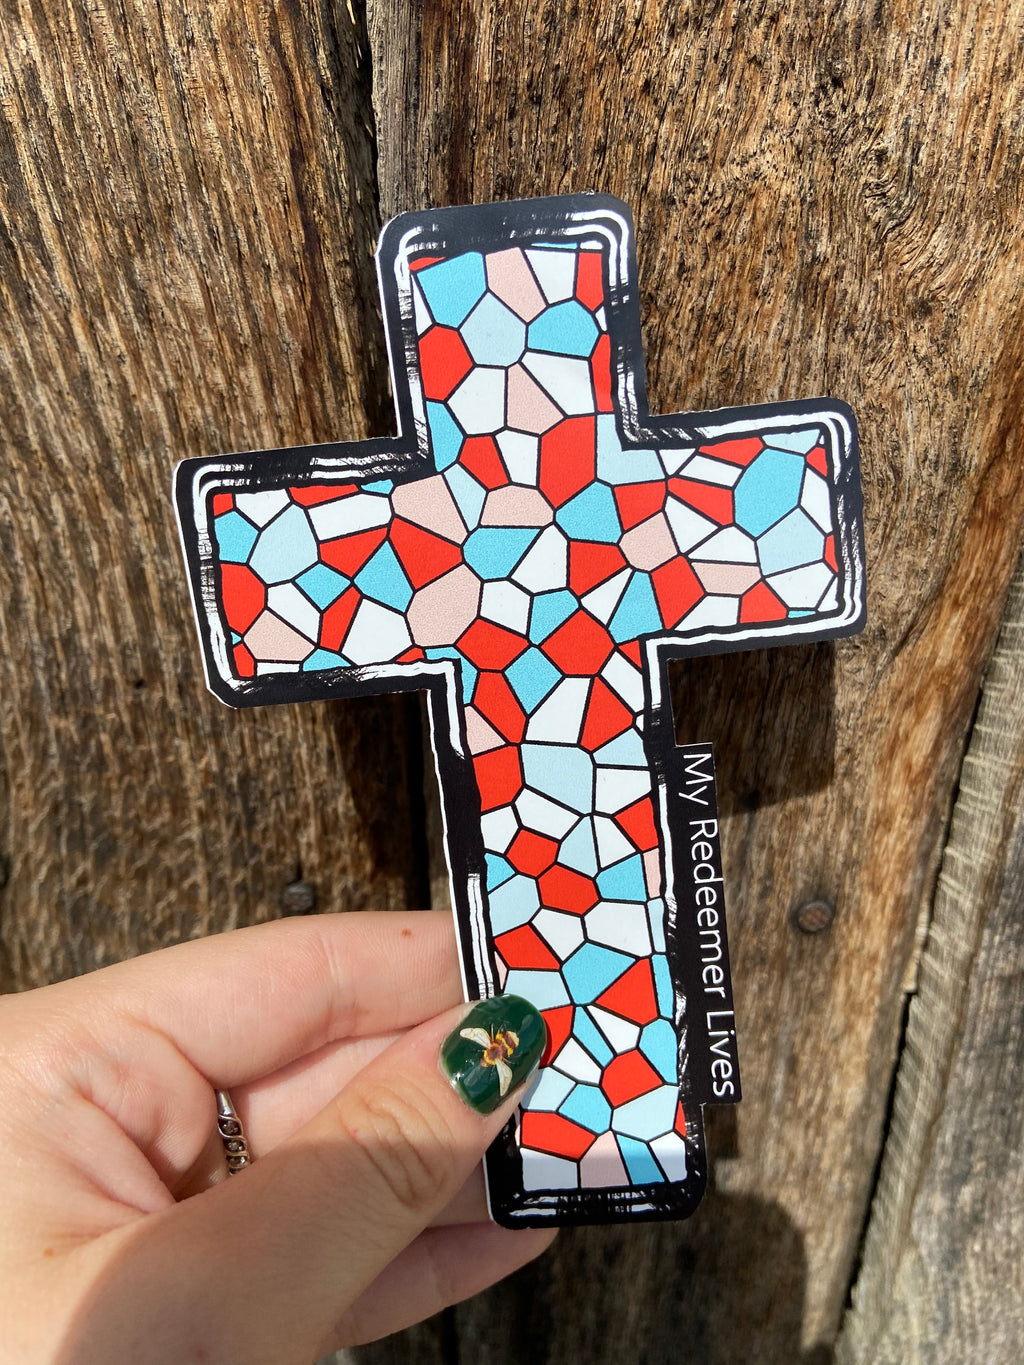 Stained Glass Cross Sticker